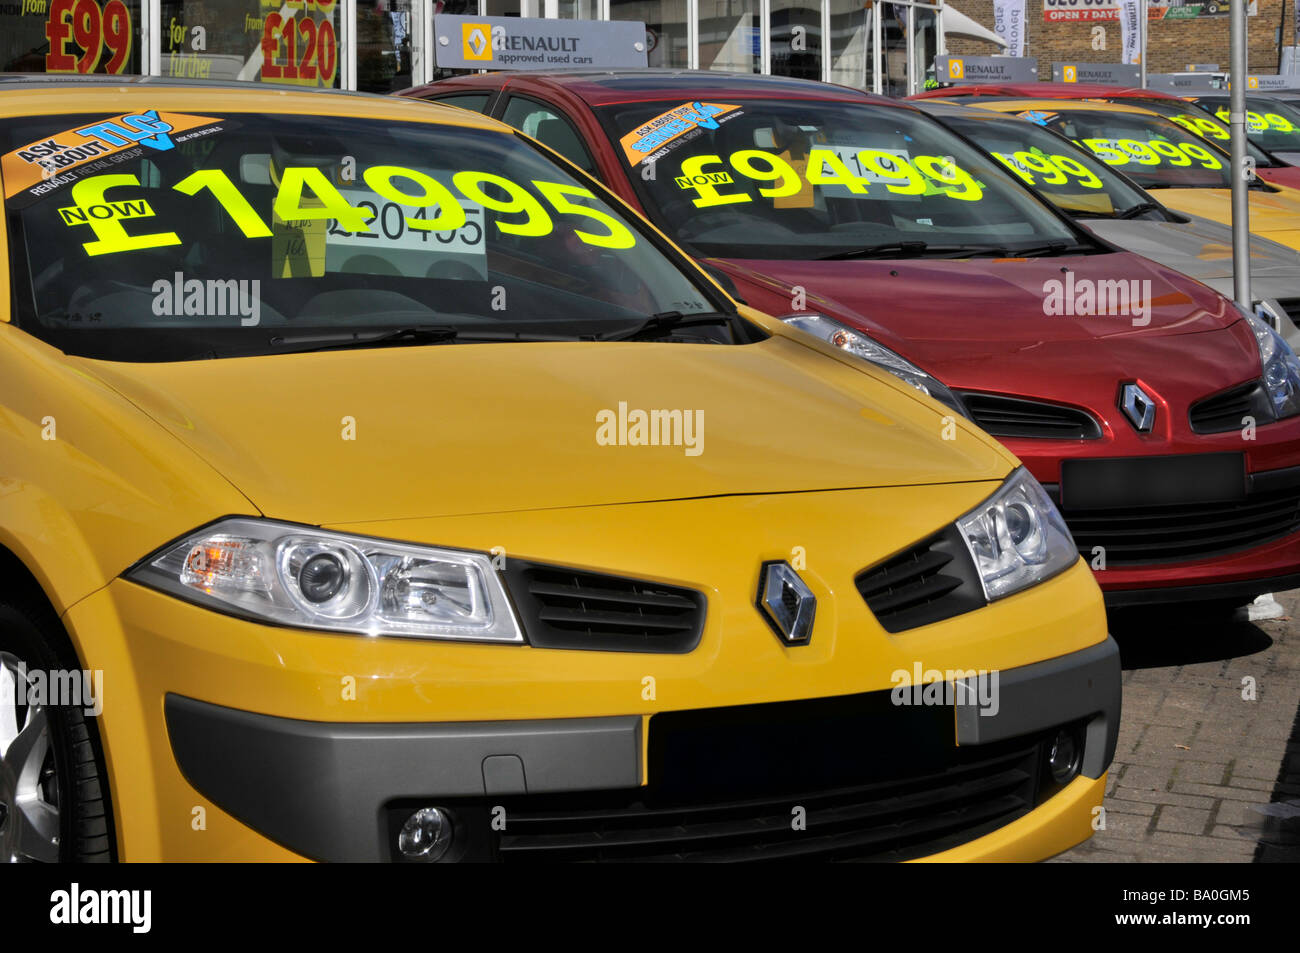 east-london-renault-car-dealer-forecourt-display-of-cars-with-large